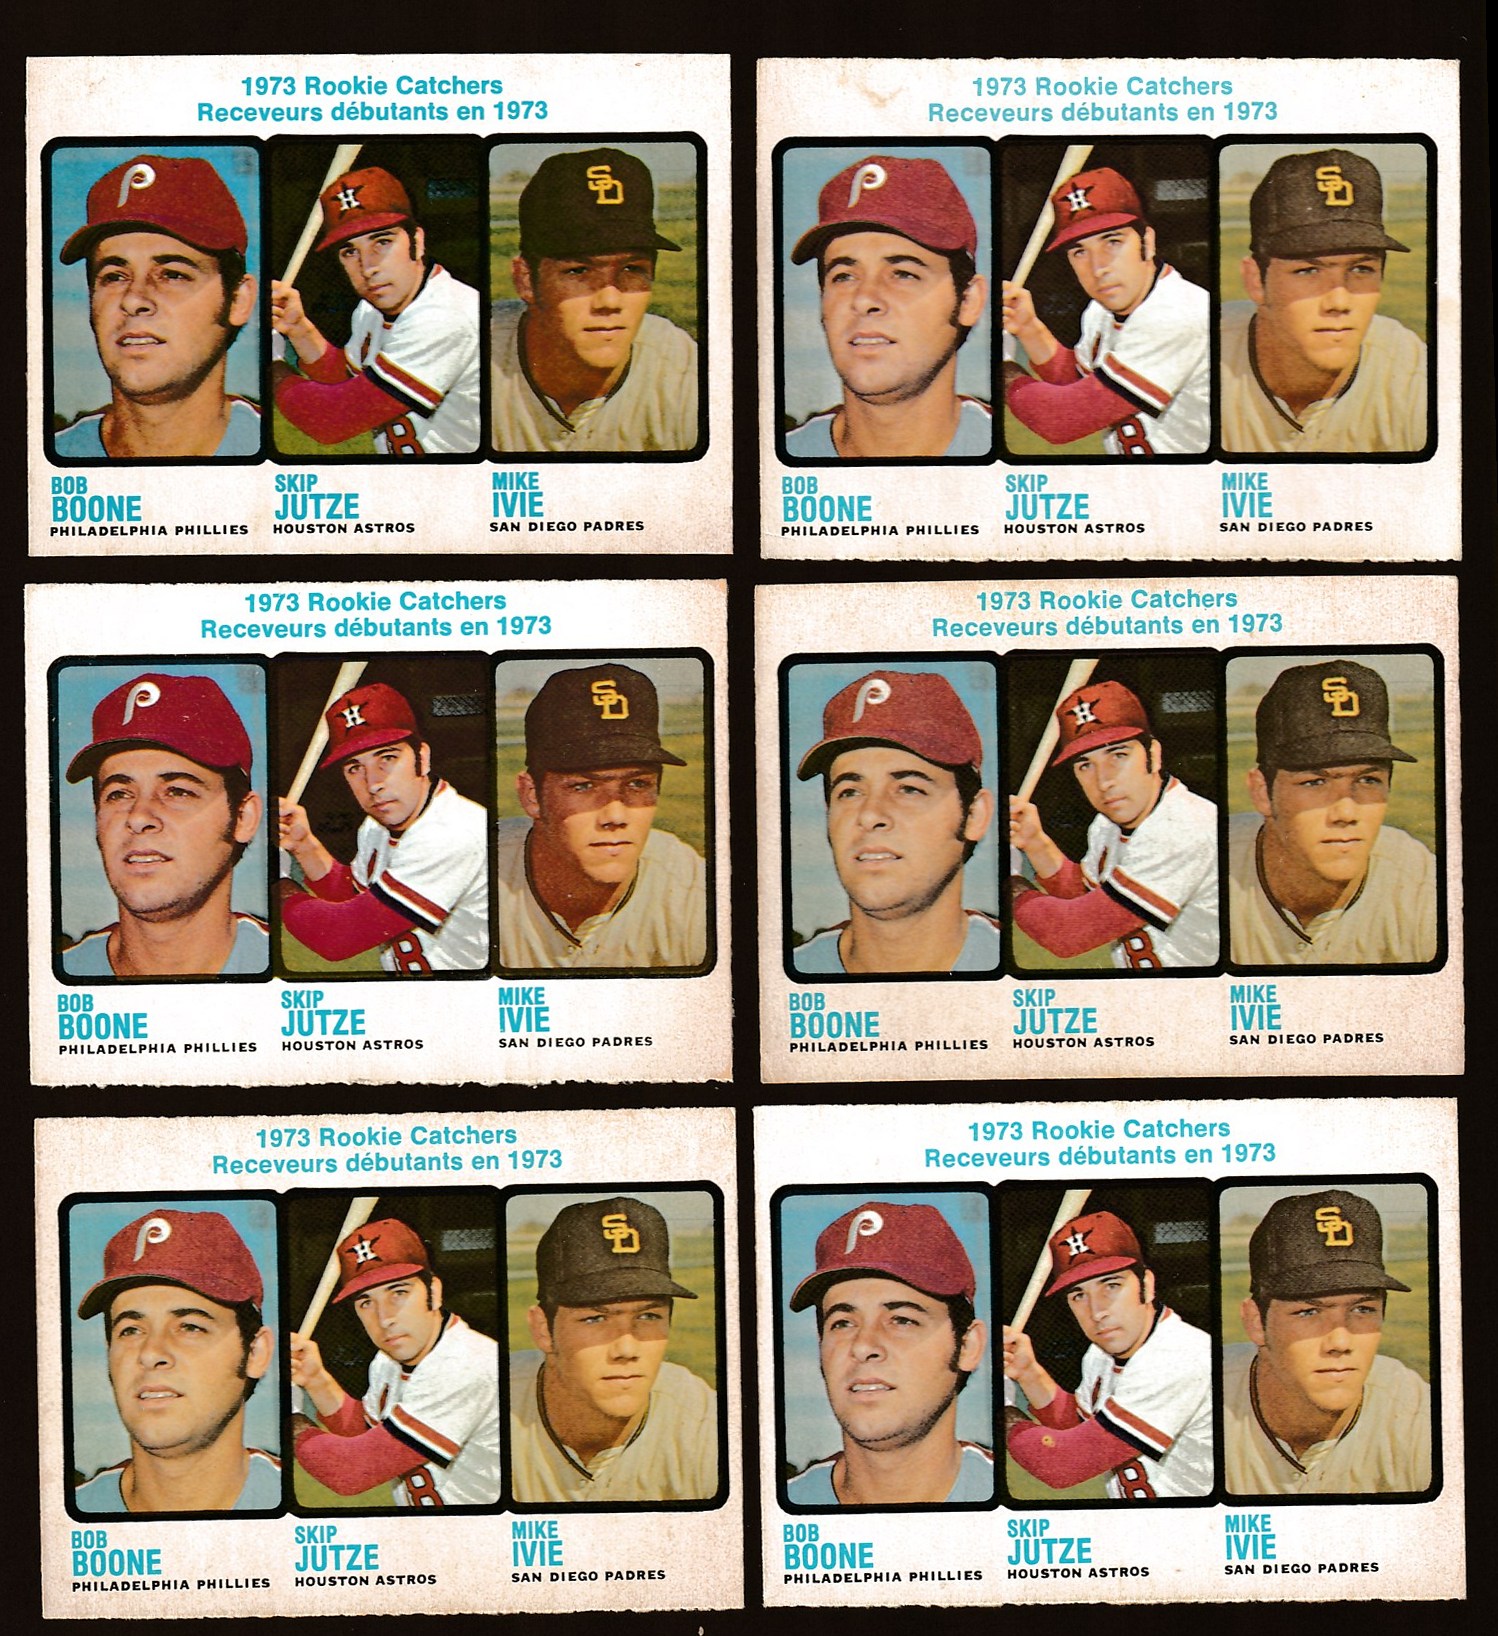 1973 O-Pee-Chee/OPC #613 Bob Boone ROOKIE Catchers (Phillies) Baseball cards value